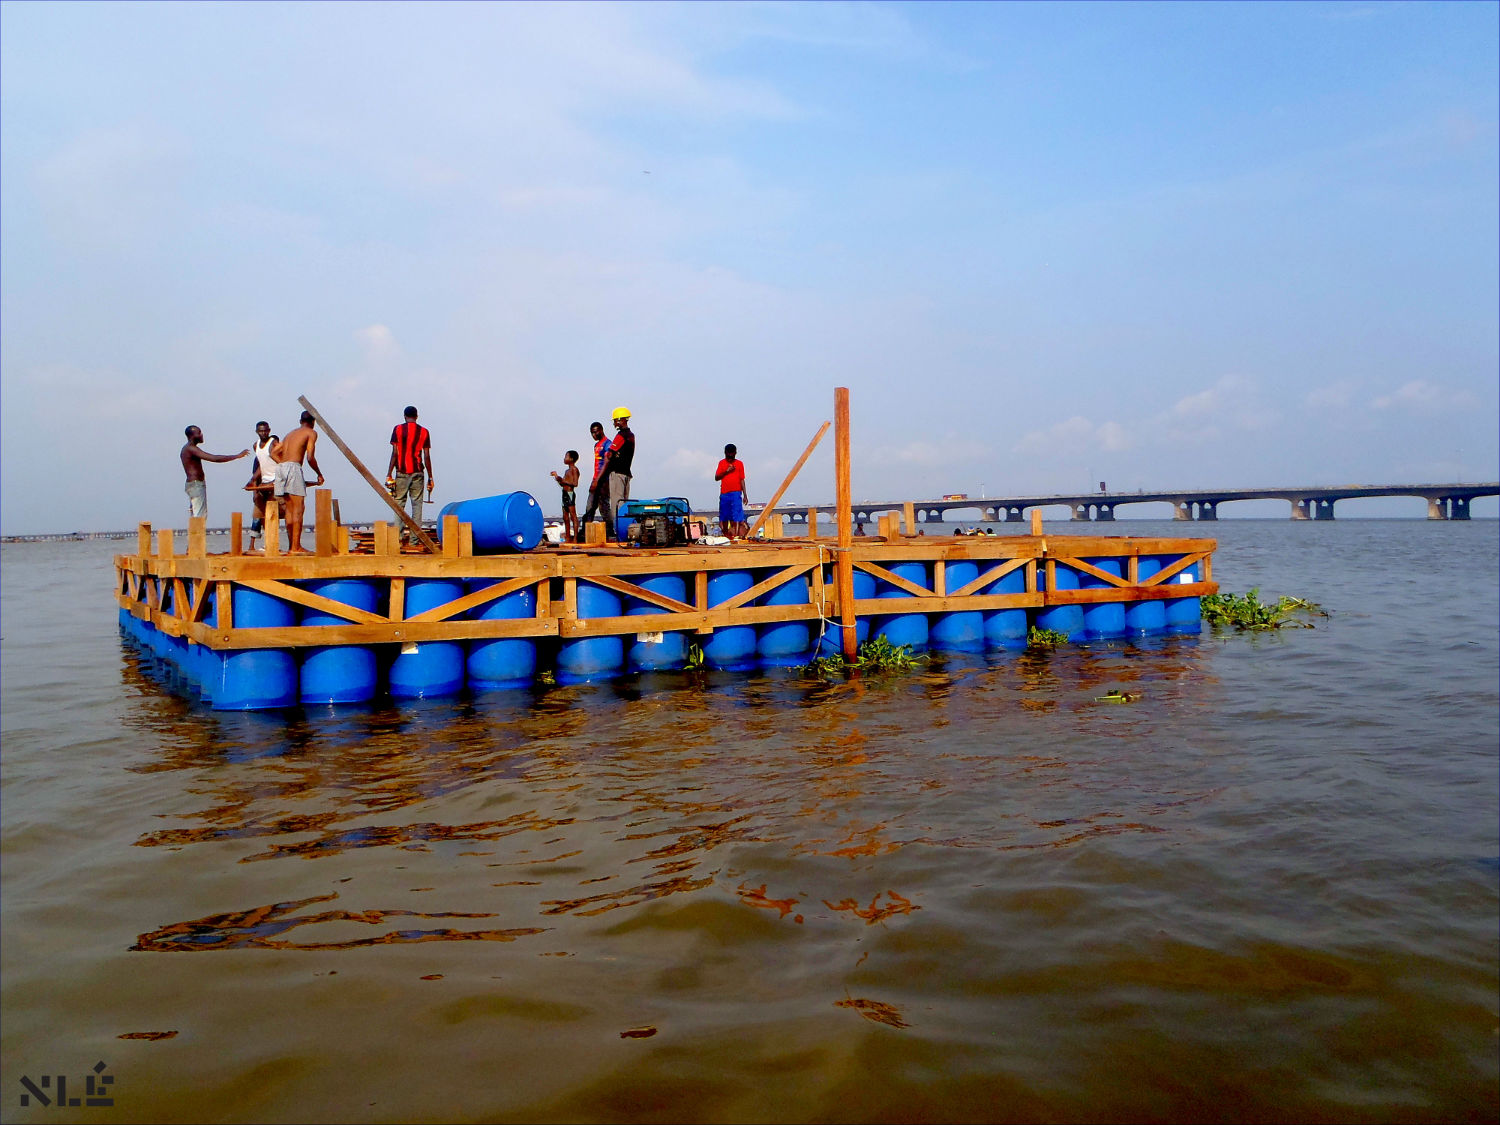 Construction begins for the Makoko floating school in Lagos, Nigeria. The design draws on local building styles and knowledge: local people have been involved from the start of the design process. Floating homes and schools can help people stay in their ancestral neighbourhoods rather than be relocated
